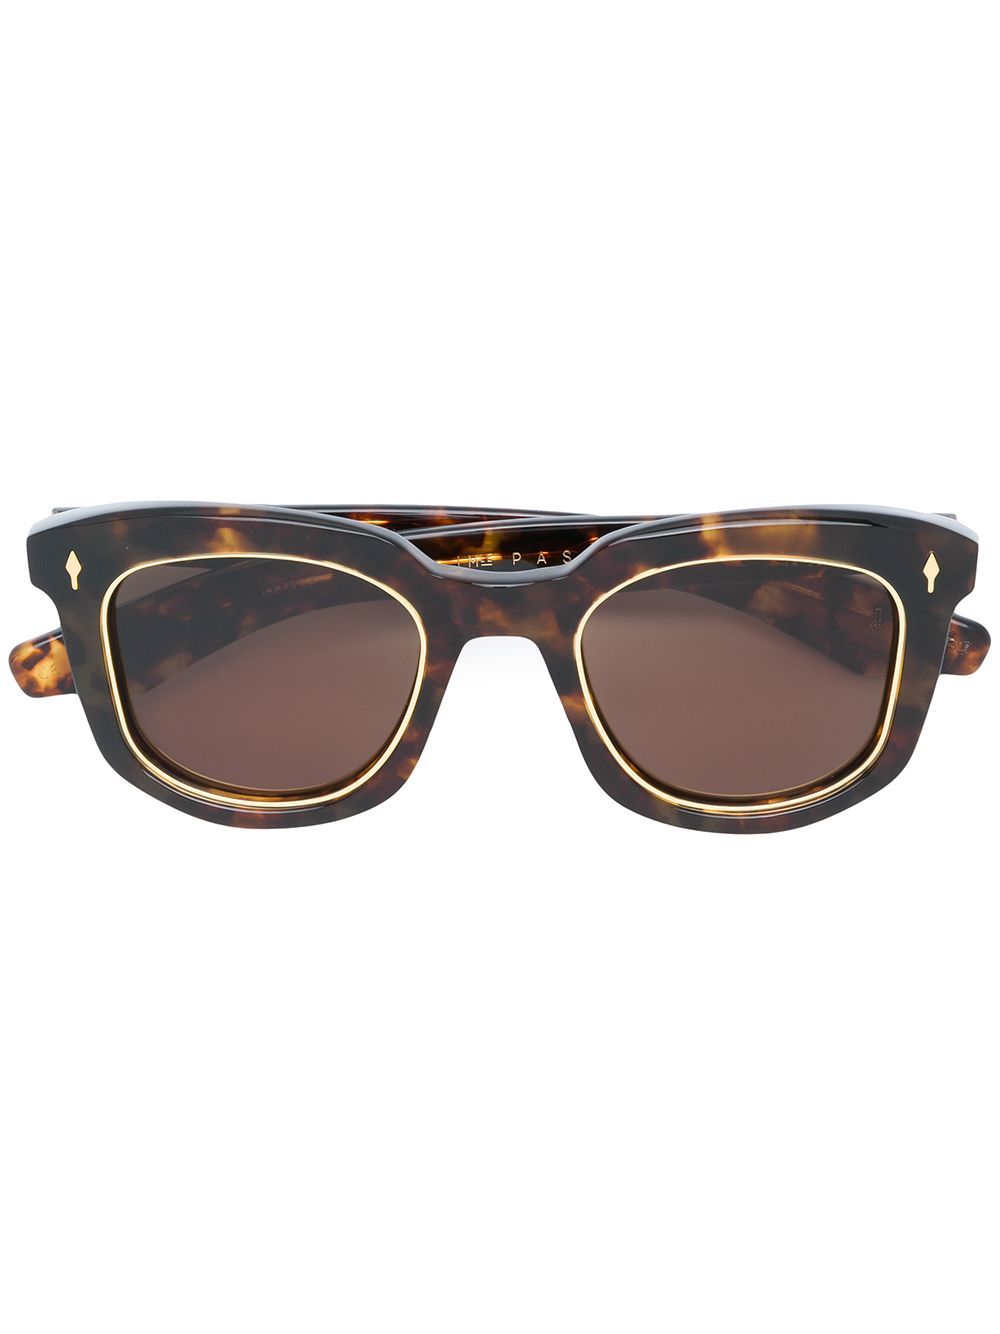 Jacques Marie Mage Pasolini sunglasses - Brown | FarFetch Global